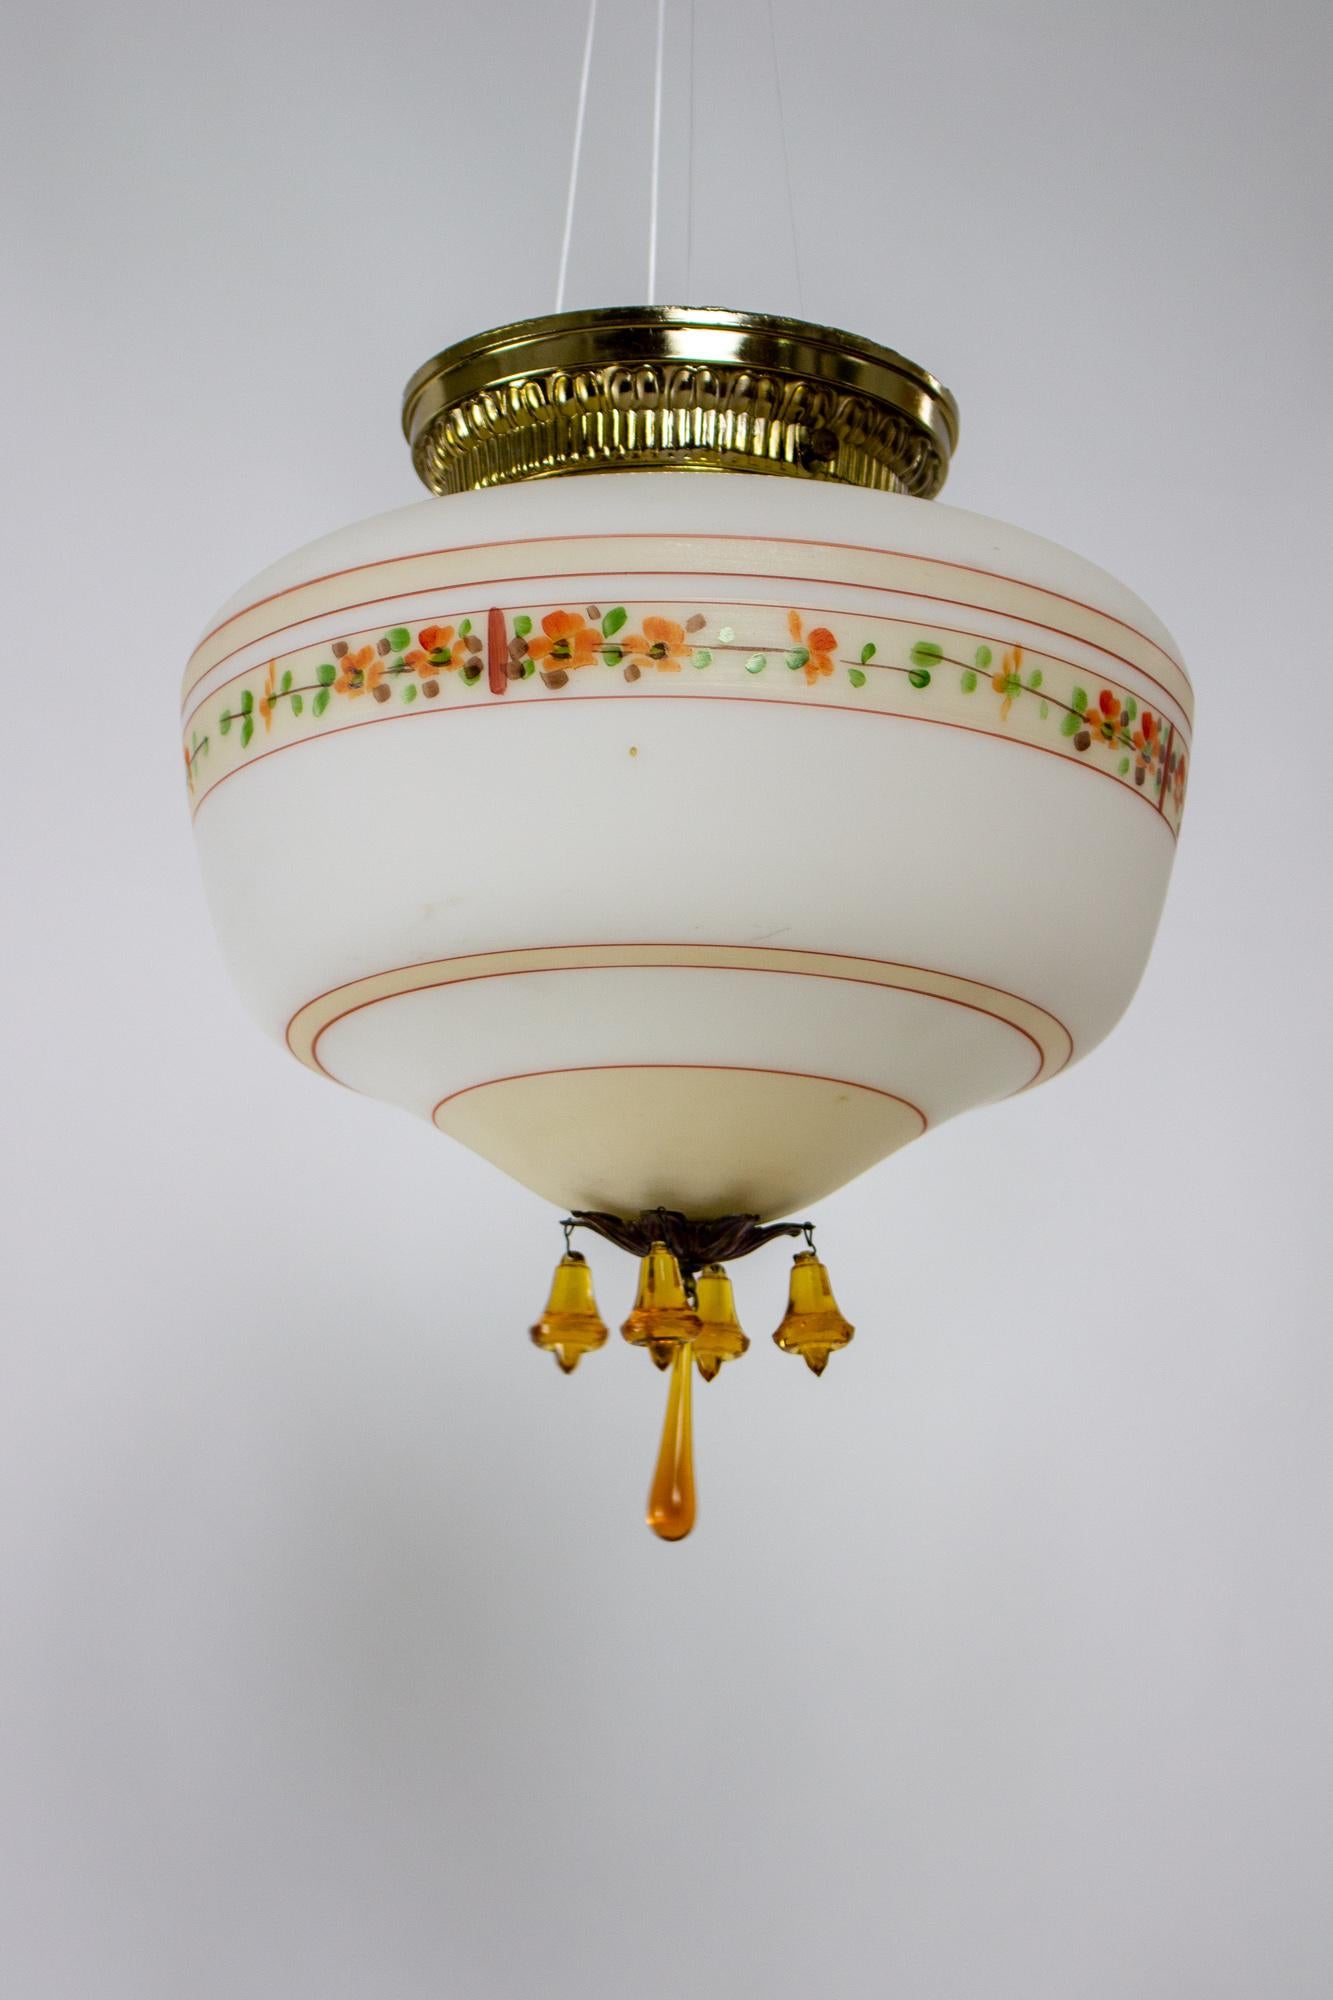 Schoolhouse light with a twist! Flush mount fixture, glass is painted with concentric circles and a ring of orange flowers. The bottom rosette holds a cluster of amber crystals.

Material: Glass,Metal
Style: Traditional,Art Deco
Place of Origin: